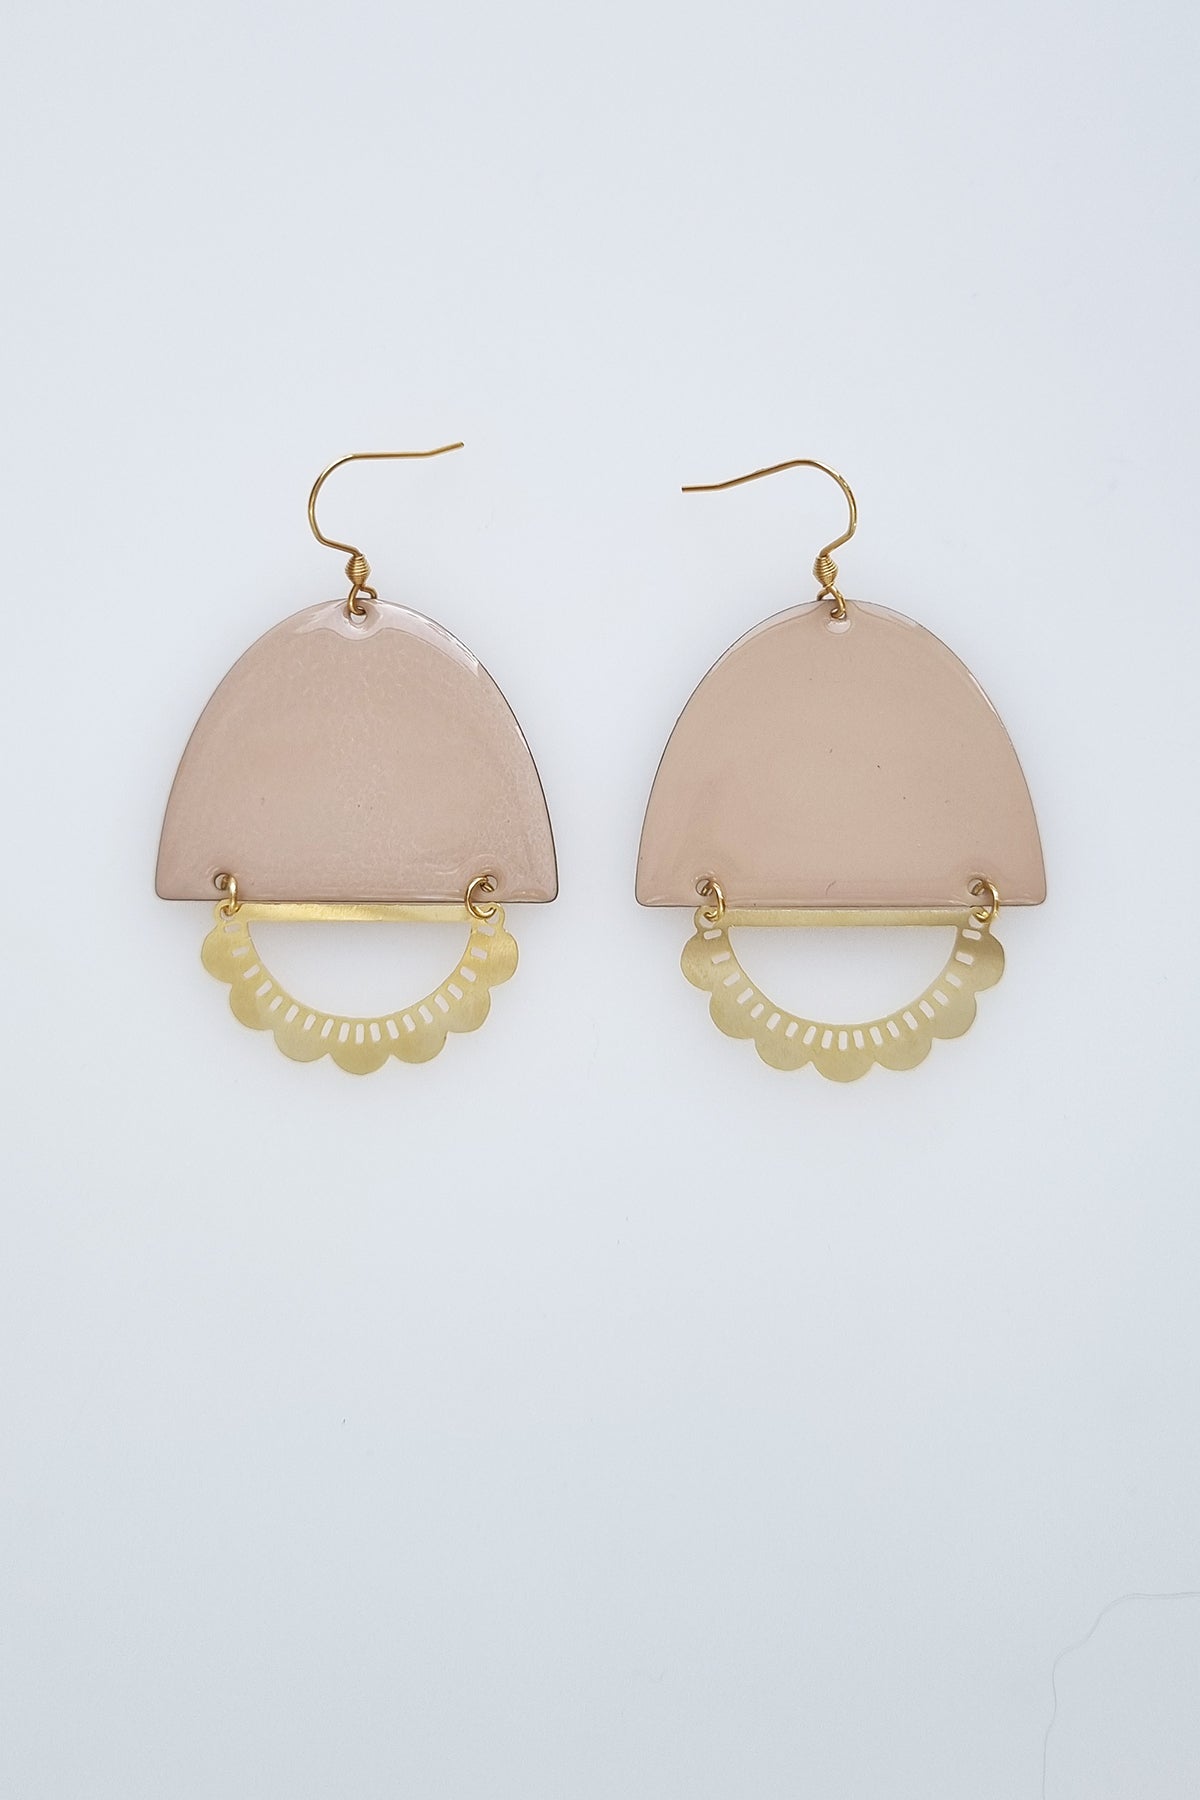 A pair of statement earrings with a hook sit against a white background. They feature a macadamia enamel arch and a horizontal plated brass D shape with scalloped detail.